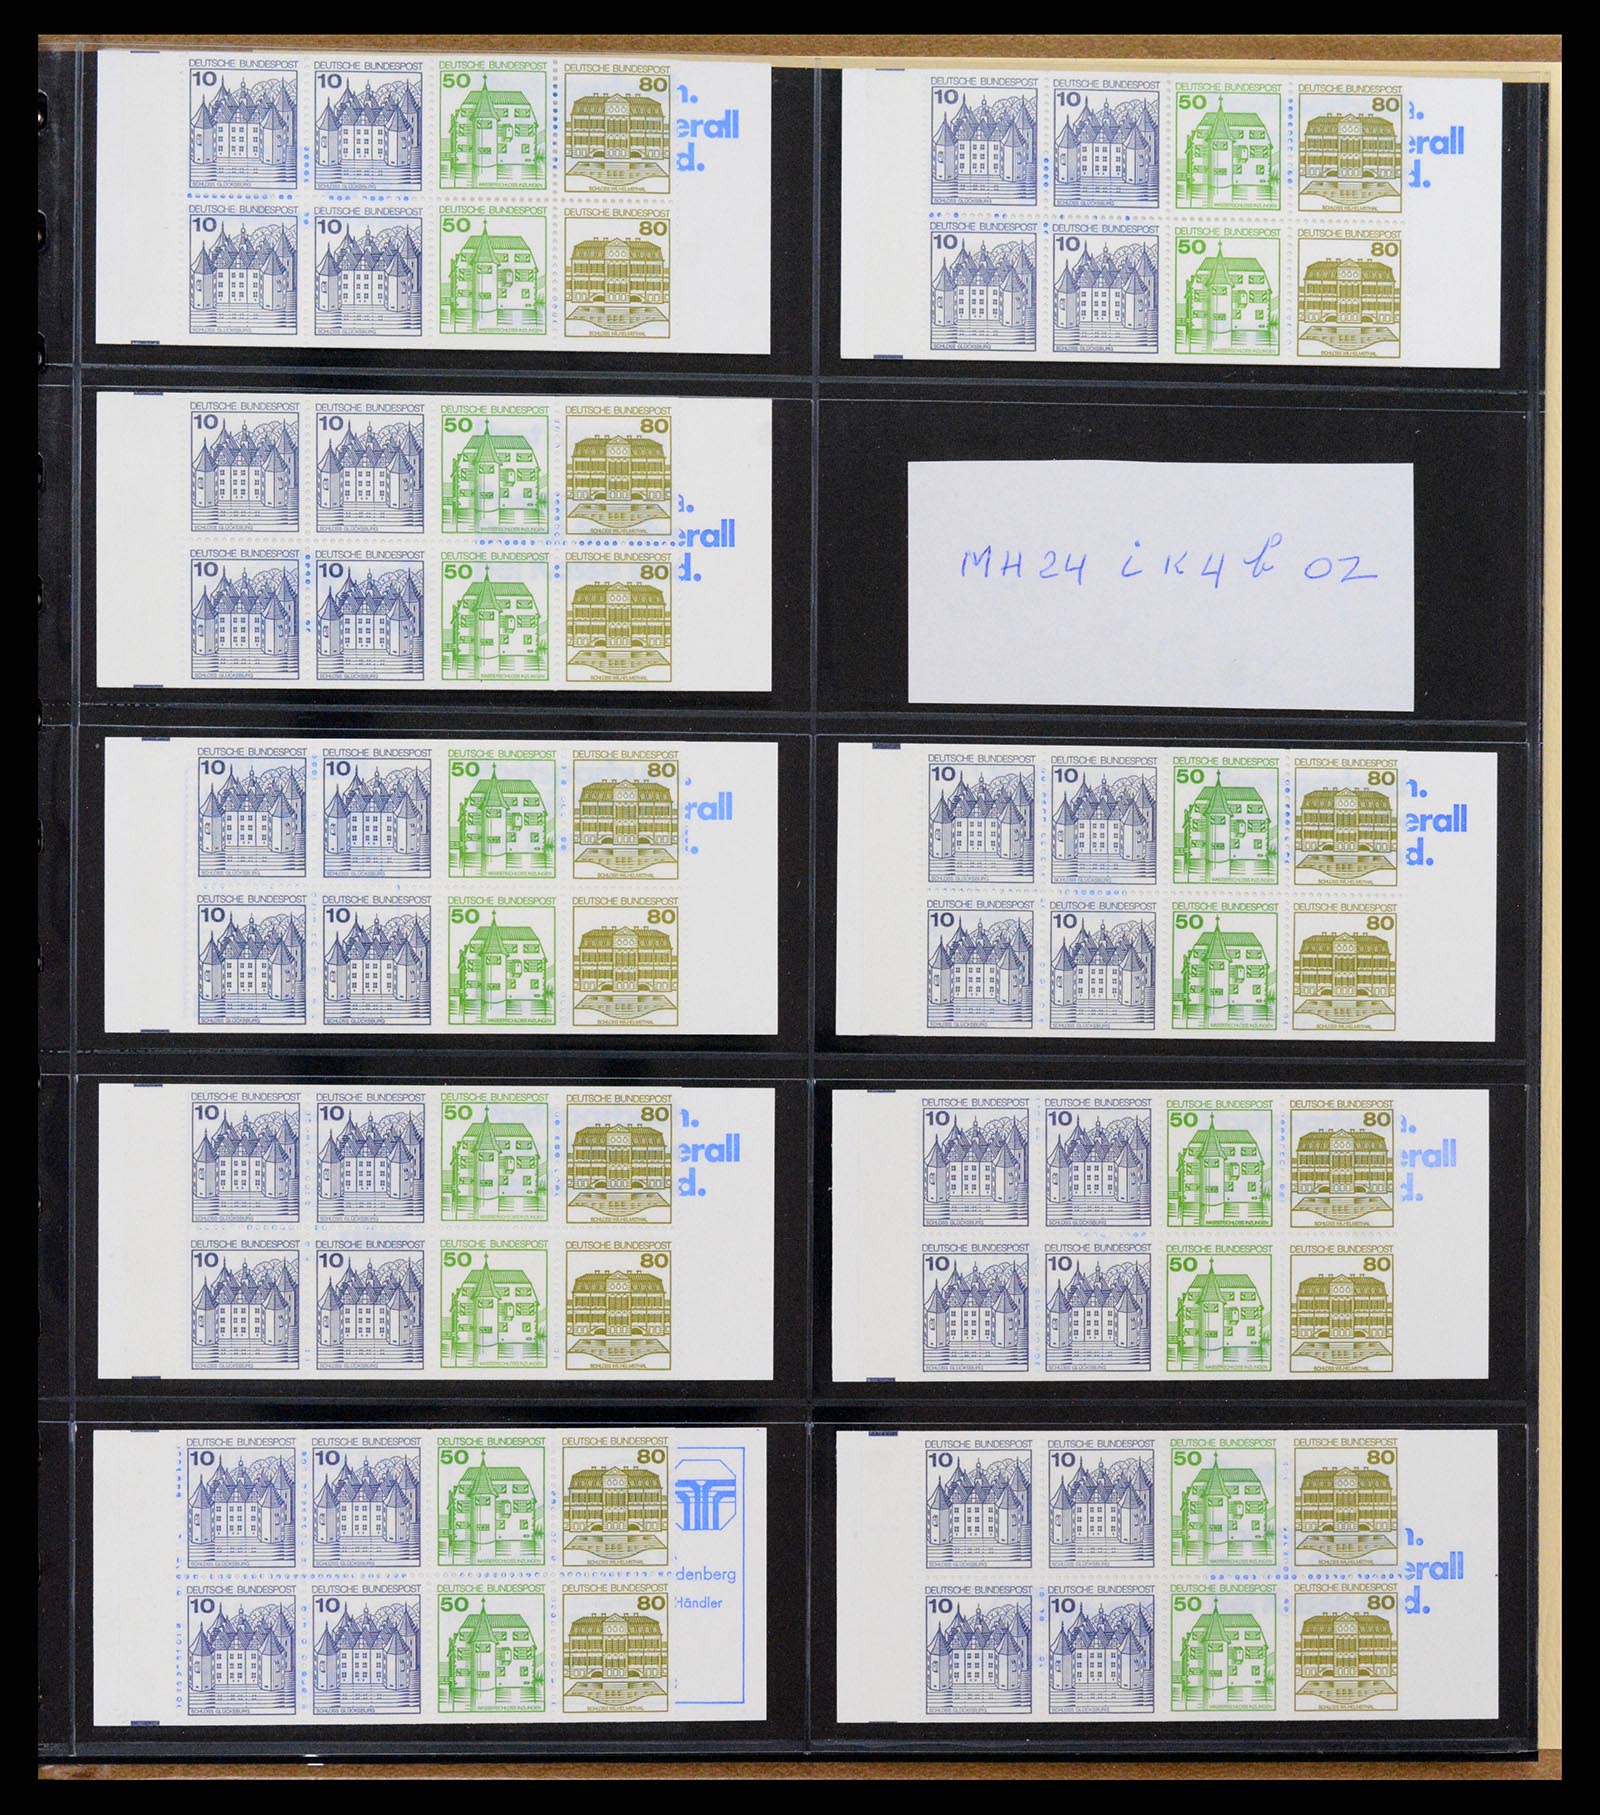 37365 053 - Stamp collection 37365 Bundespost stamp booklets 1951-2001.